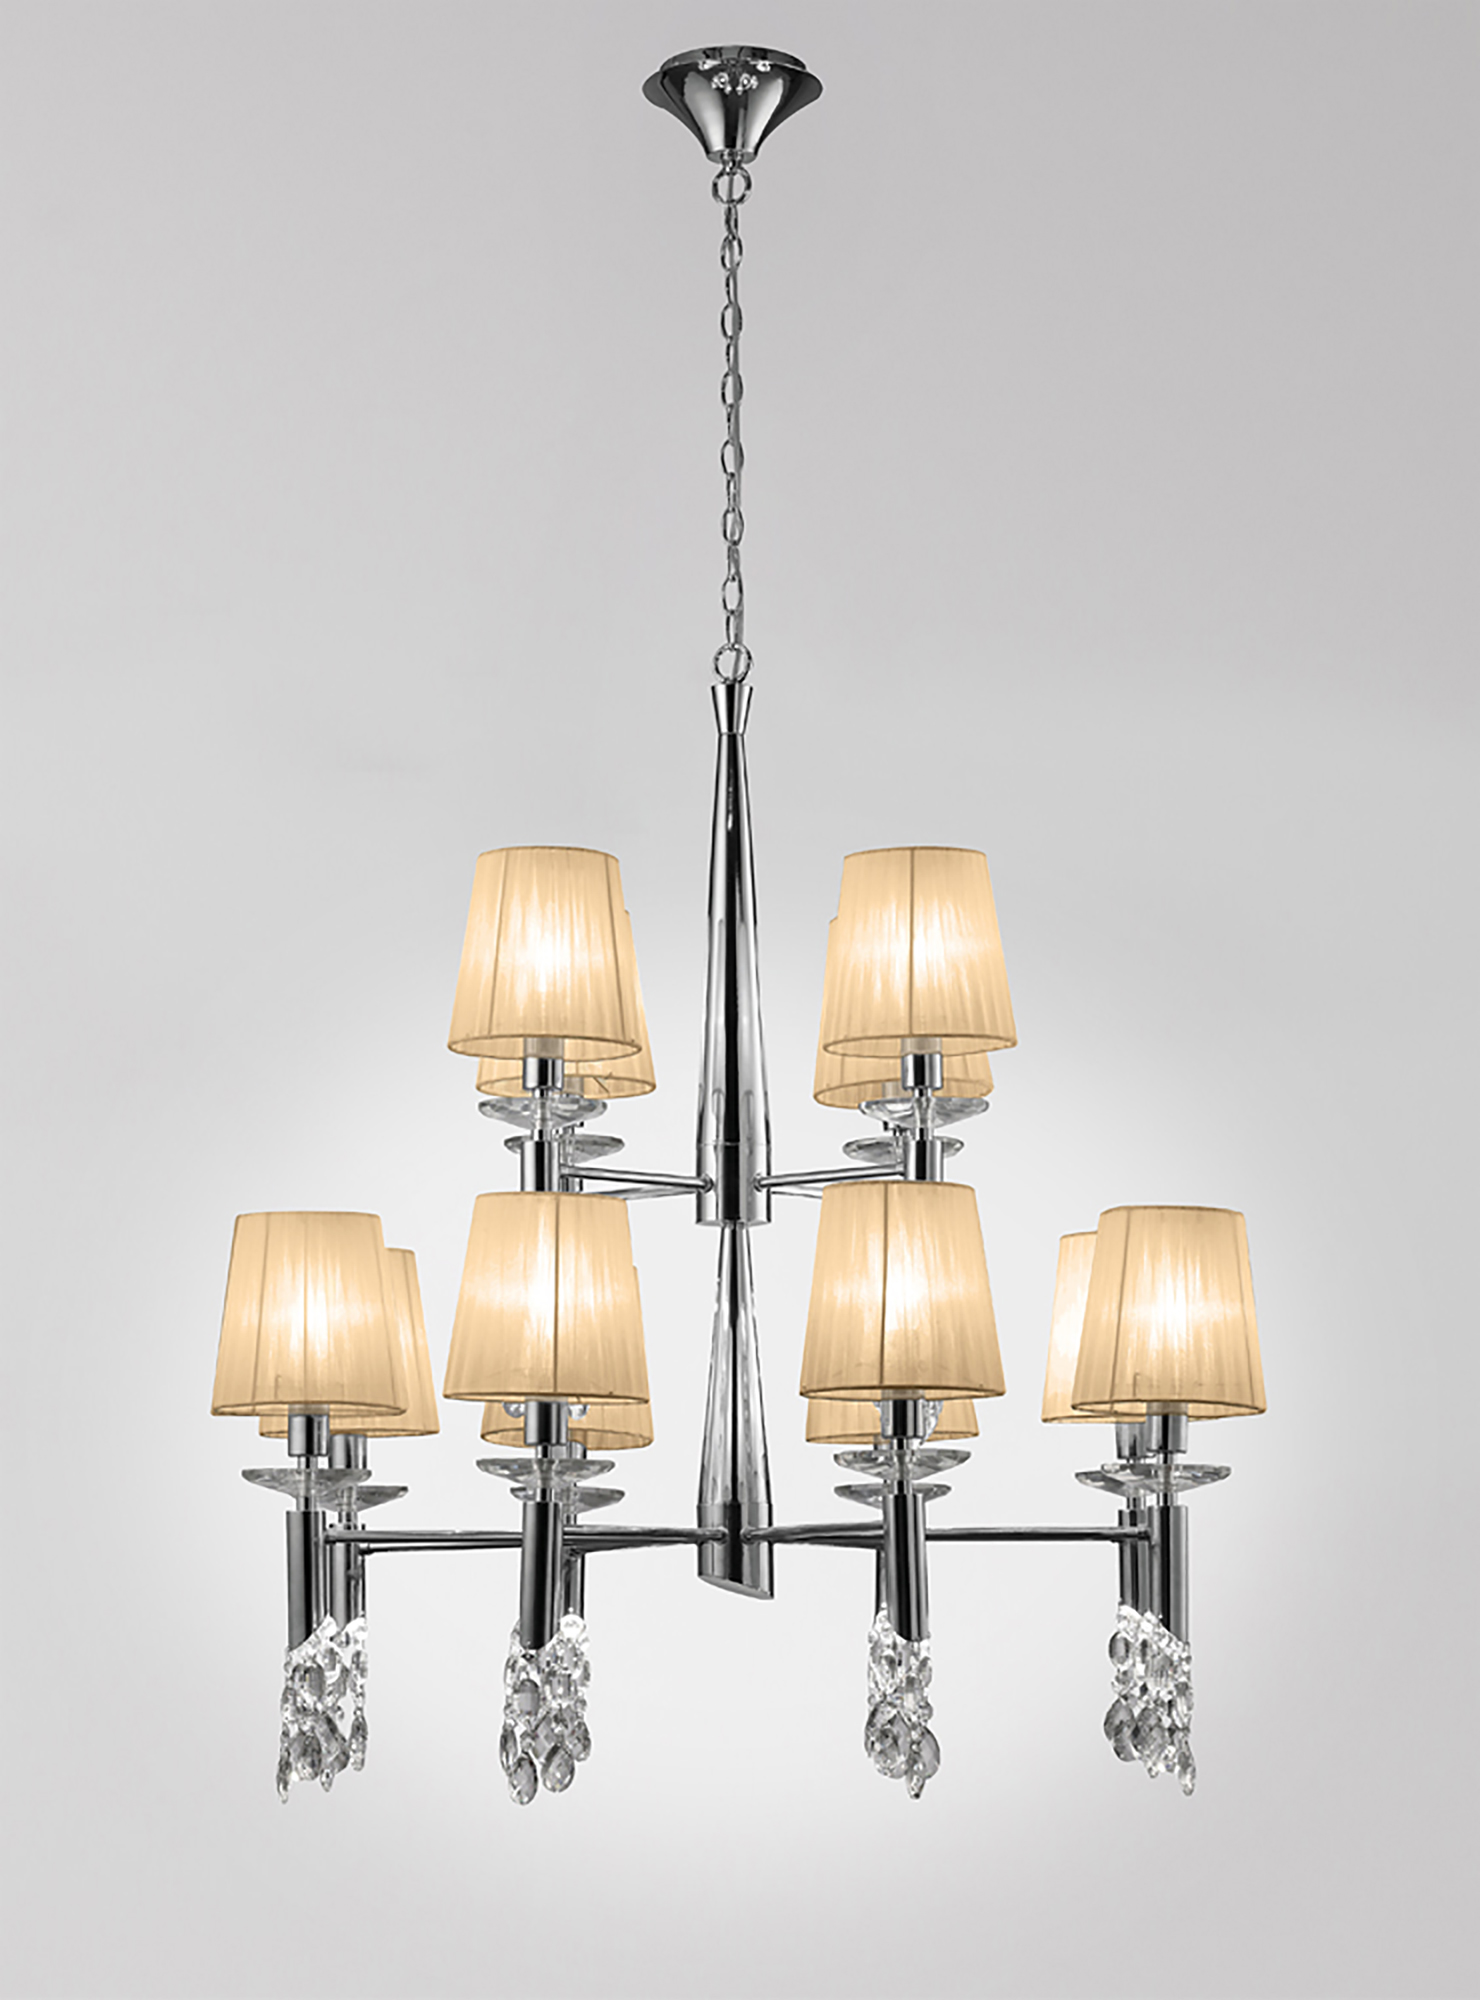 Tiffany Crystal Ceiling Lights Mantra Tiered Crystal Fittings